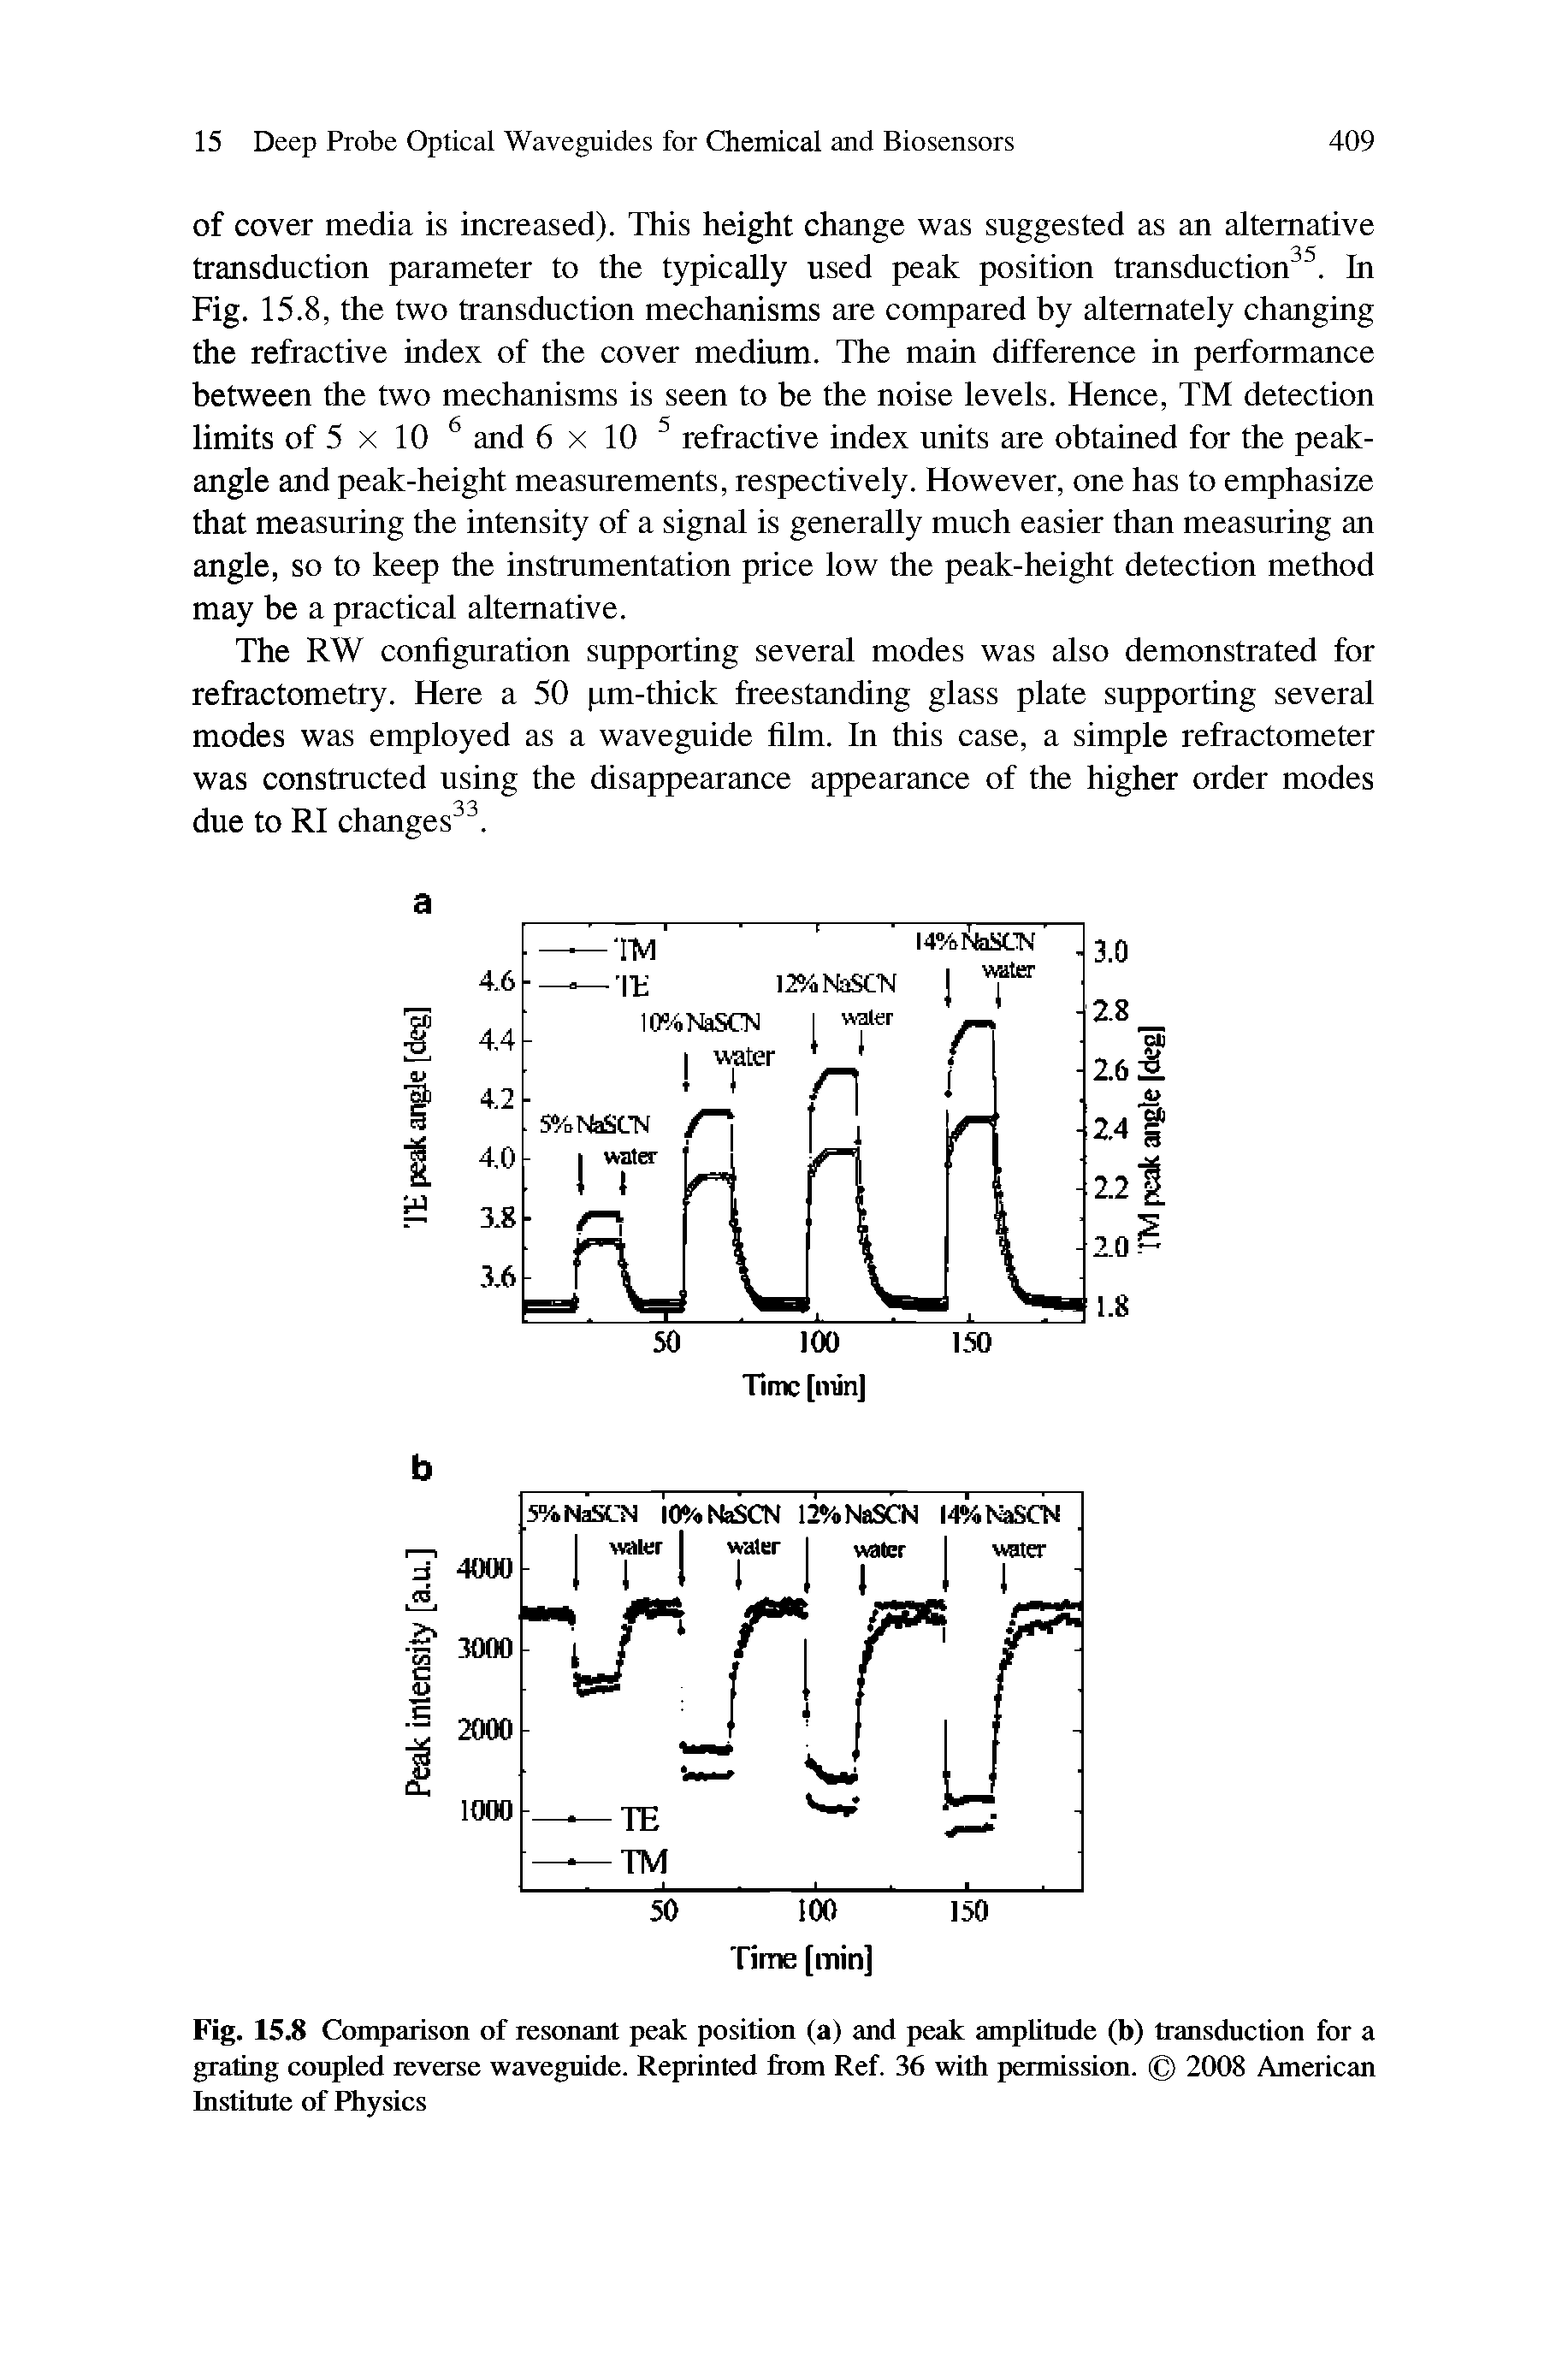 Fig. 15.8 Comparison of resonant peak position (a) and peak amplitude (b) transduction for a grating coupled reverse waveguide. Reprinted from Ref. 36 with permission. 2008 American Institute of Physics...